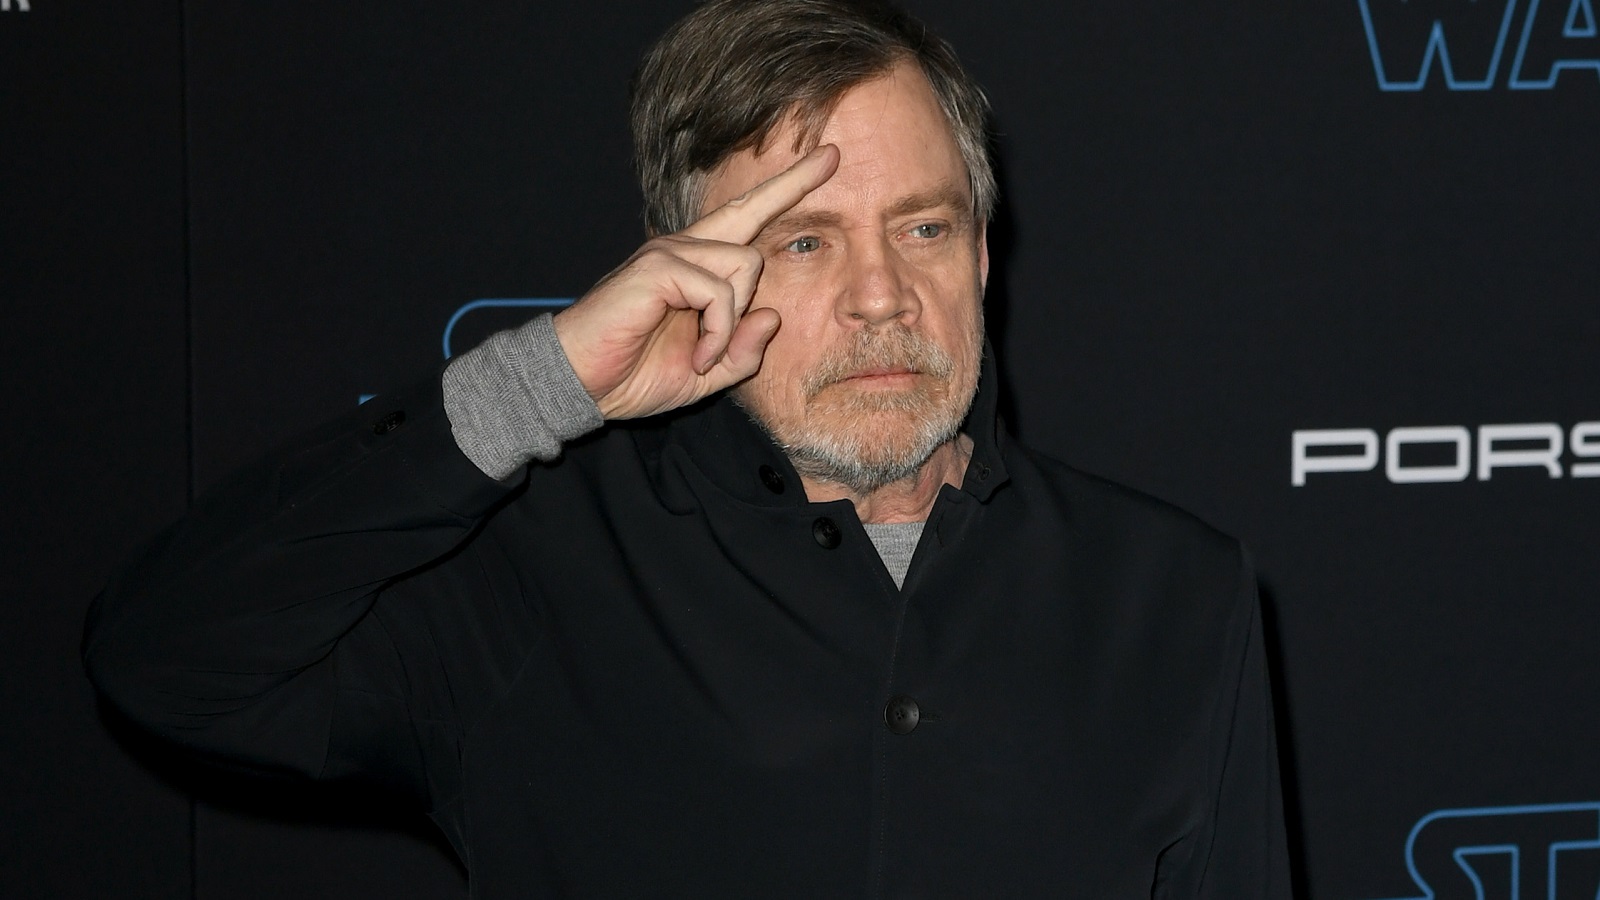 Mark Hamill offers us a glimpse at life when the cameras weren’t rolling on ‘Star Wars’